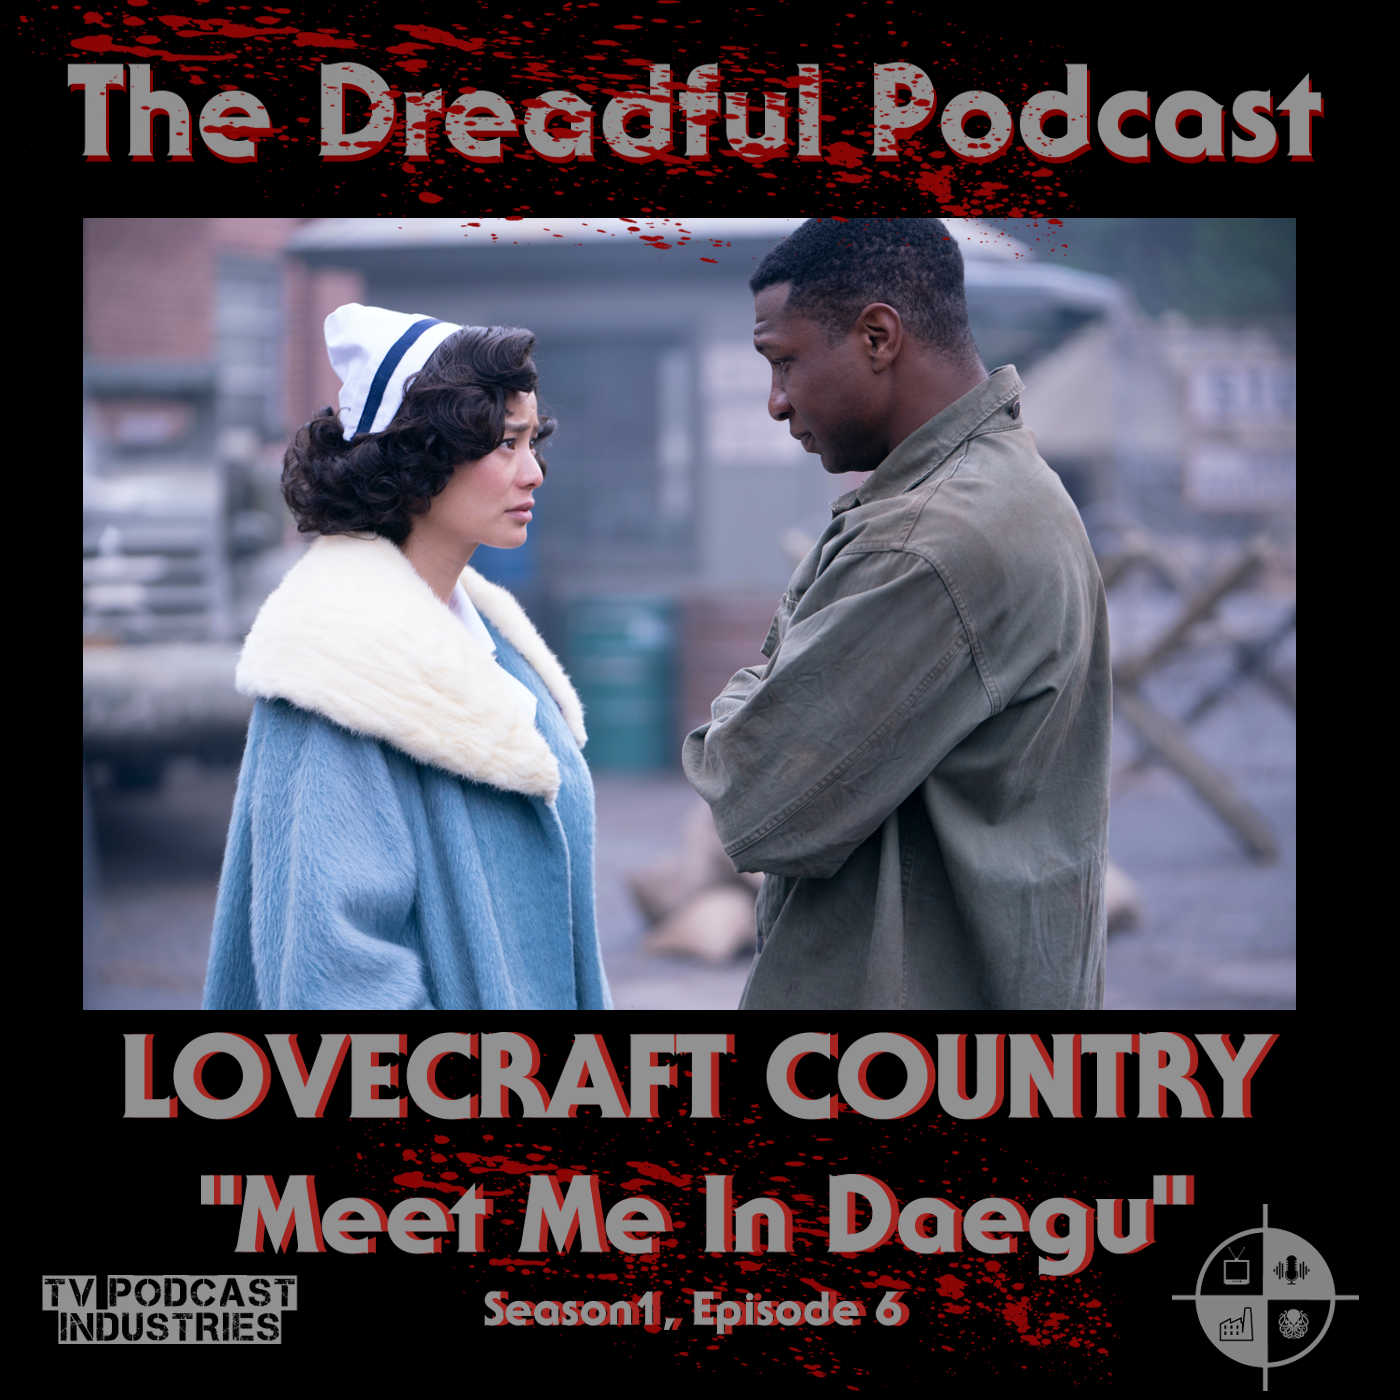 Lovecraft Country Episode 6 “Meet Me in Daegu” Podcast